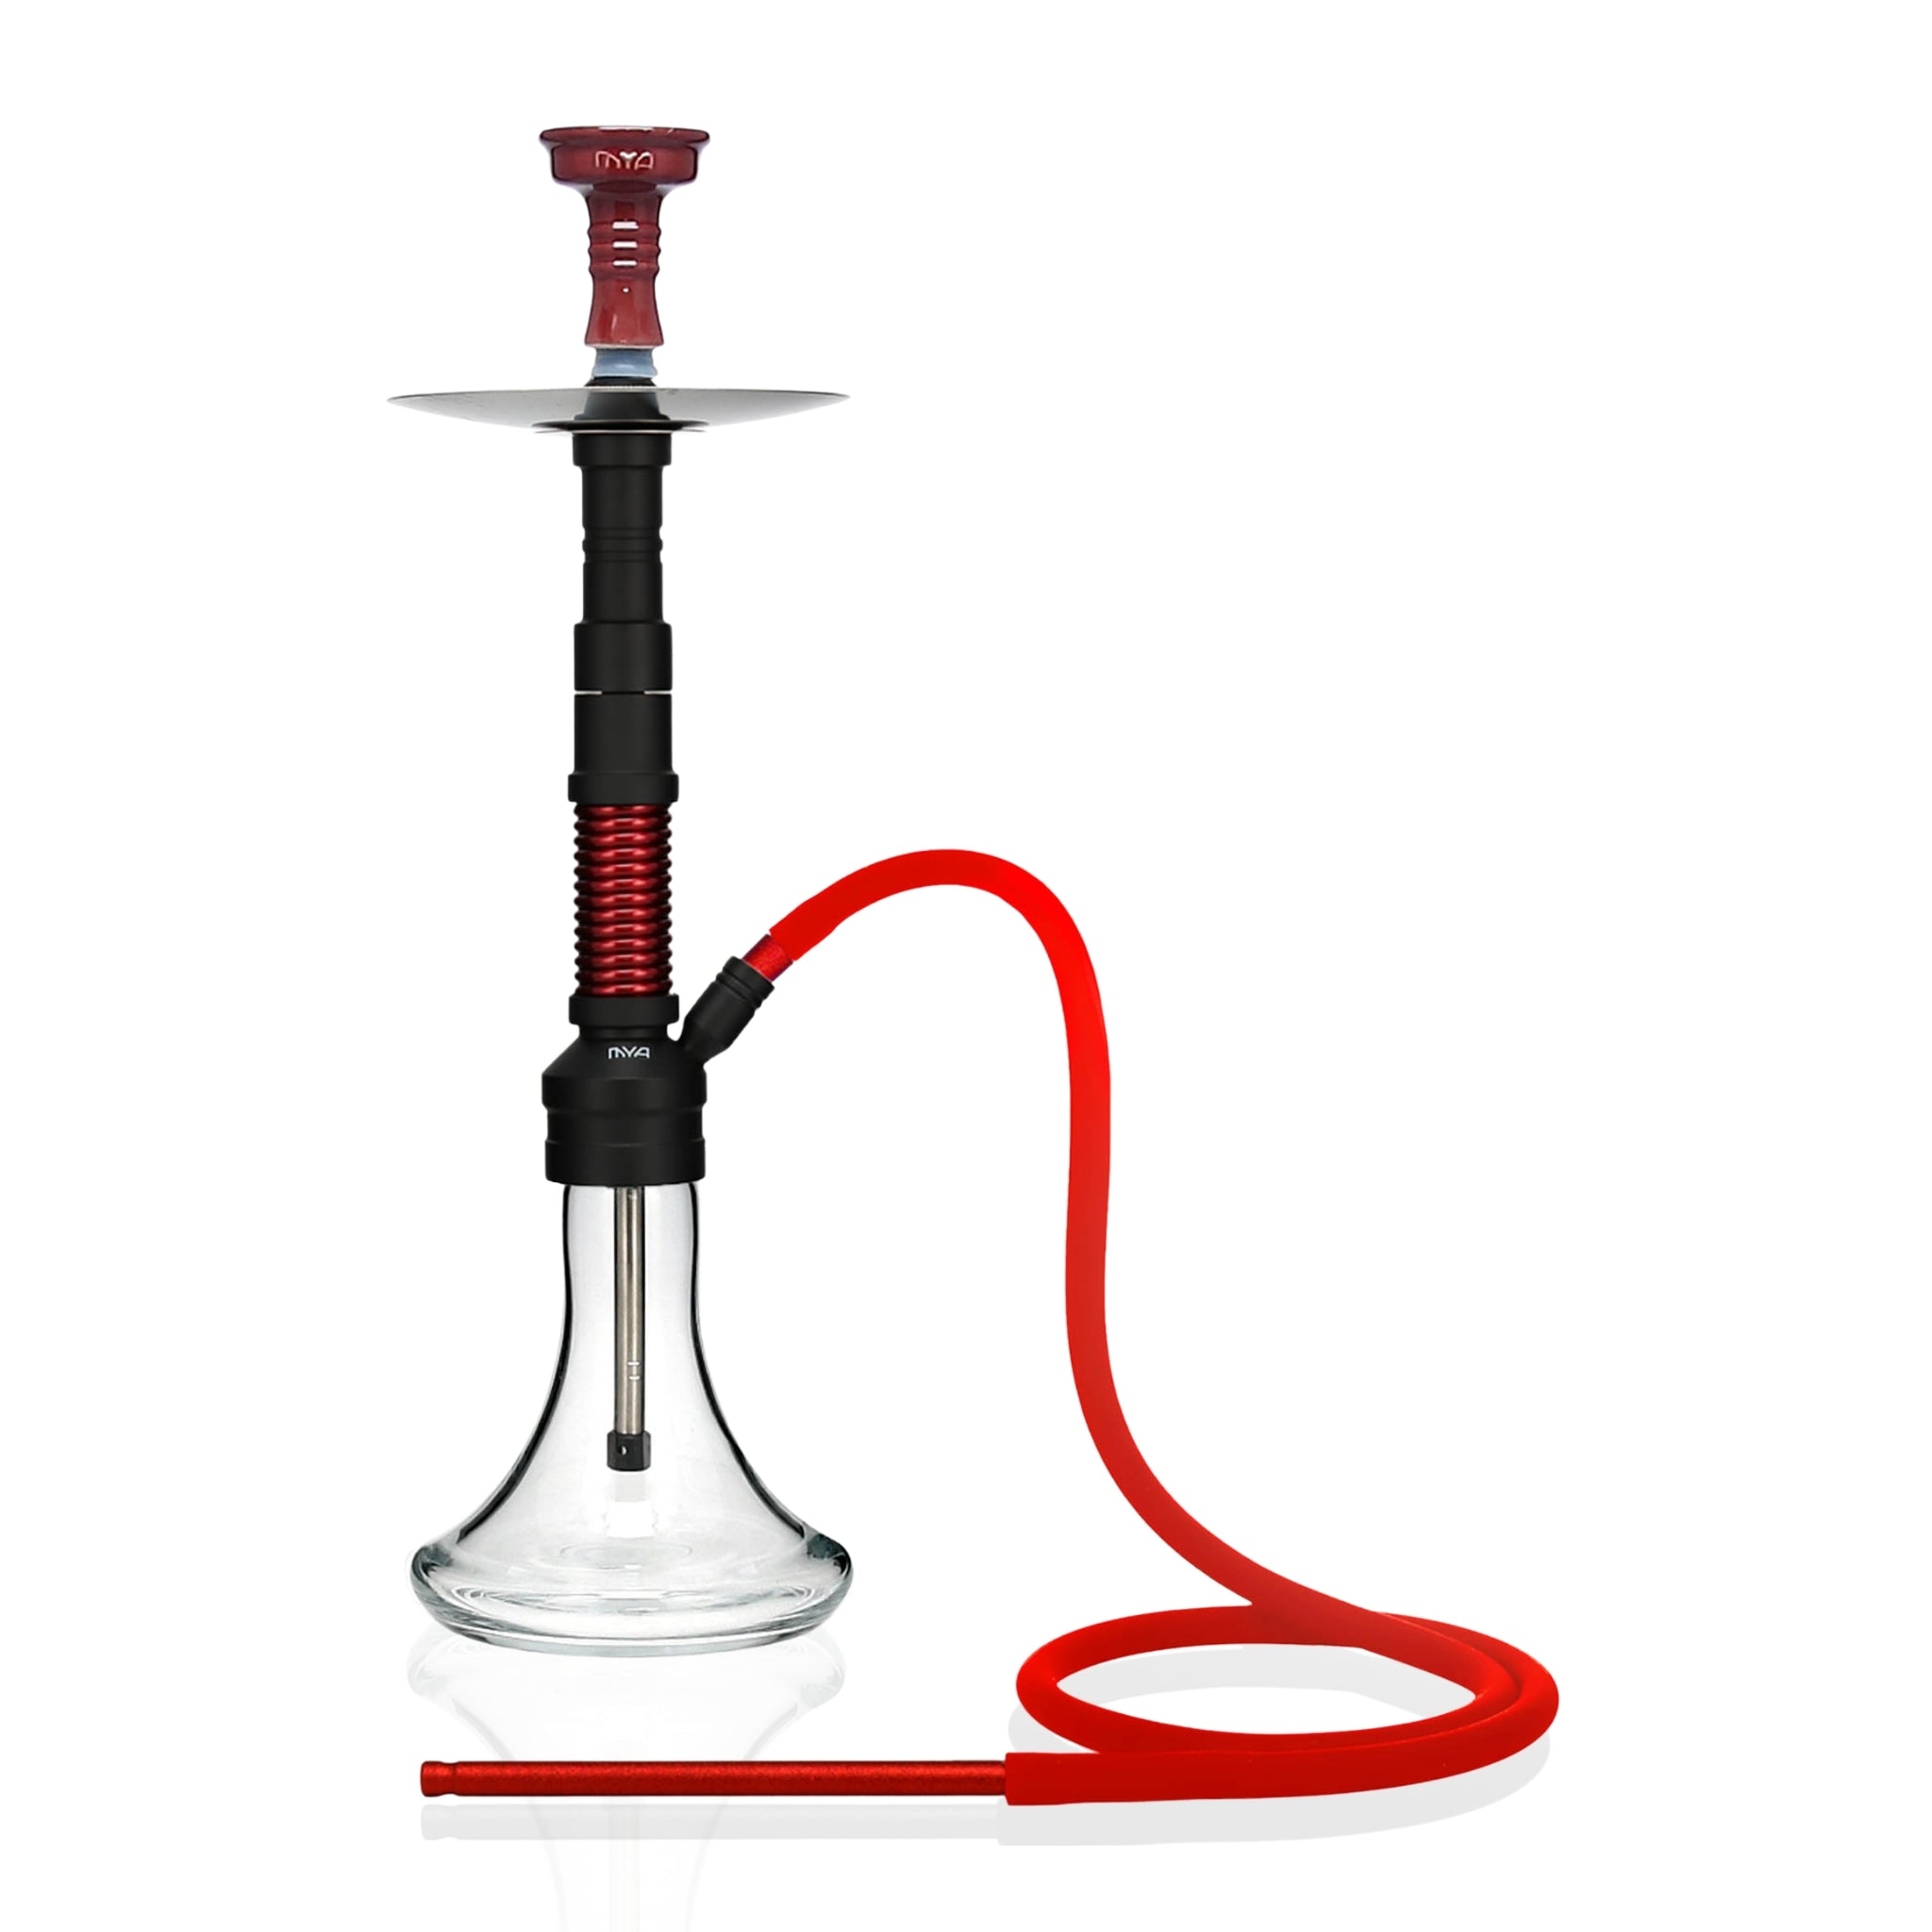 Red ORO-1A6 MYA Hookah #color_Red